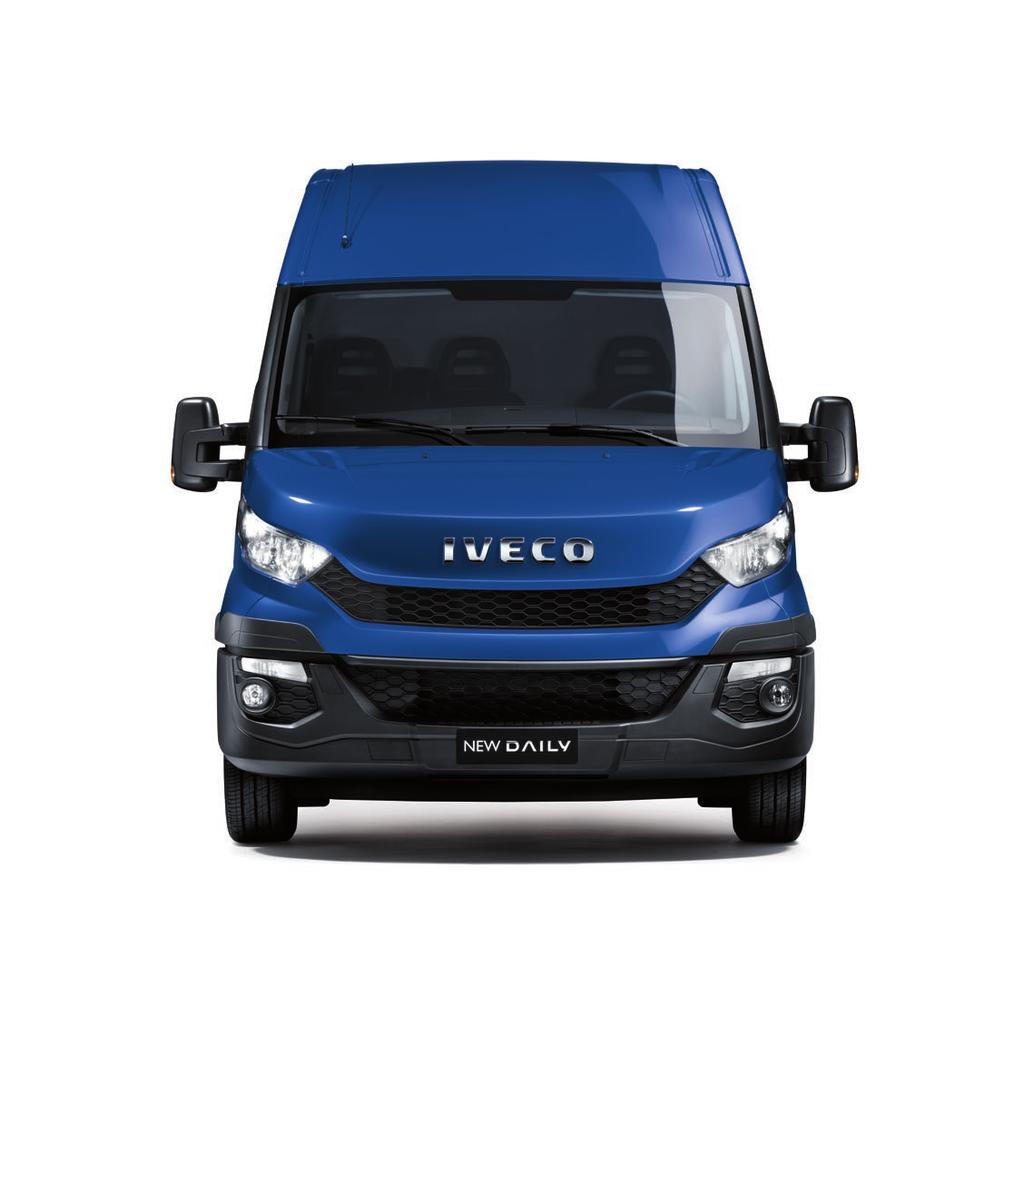 Iveco s range of locally built models are complemented by a selection of high quality, fully-imported vehicles from Europe, including the award-winning Daily Van and Cab Chassis range, including the